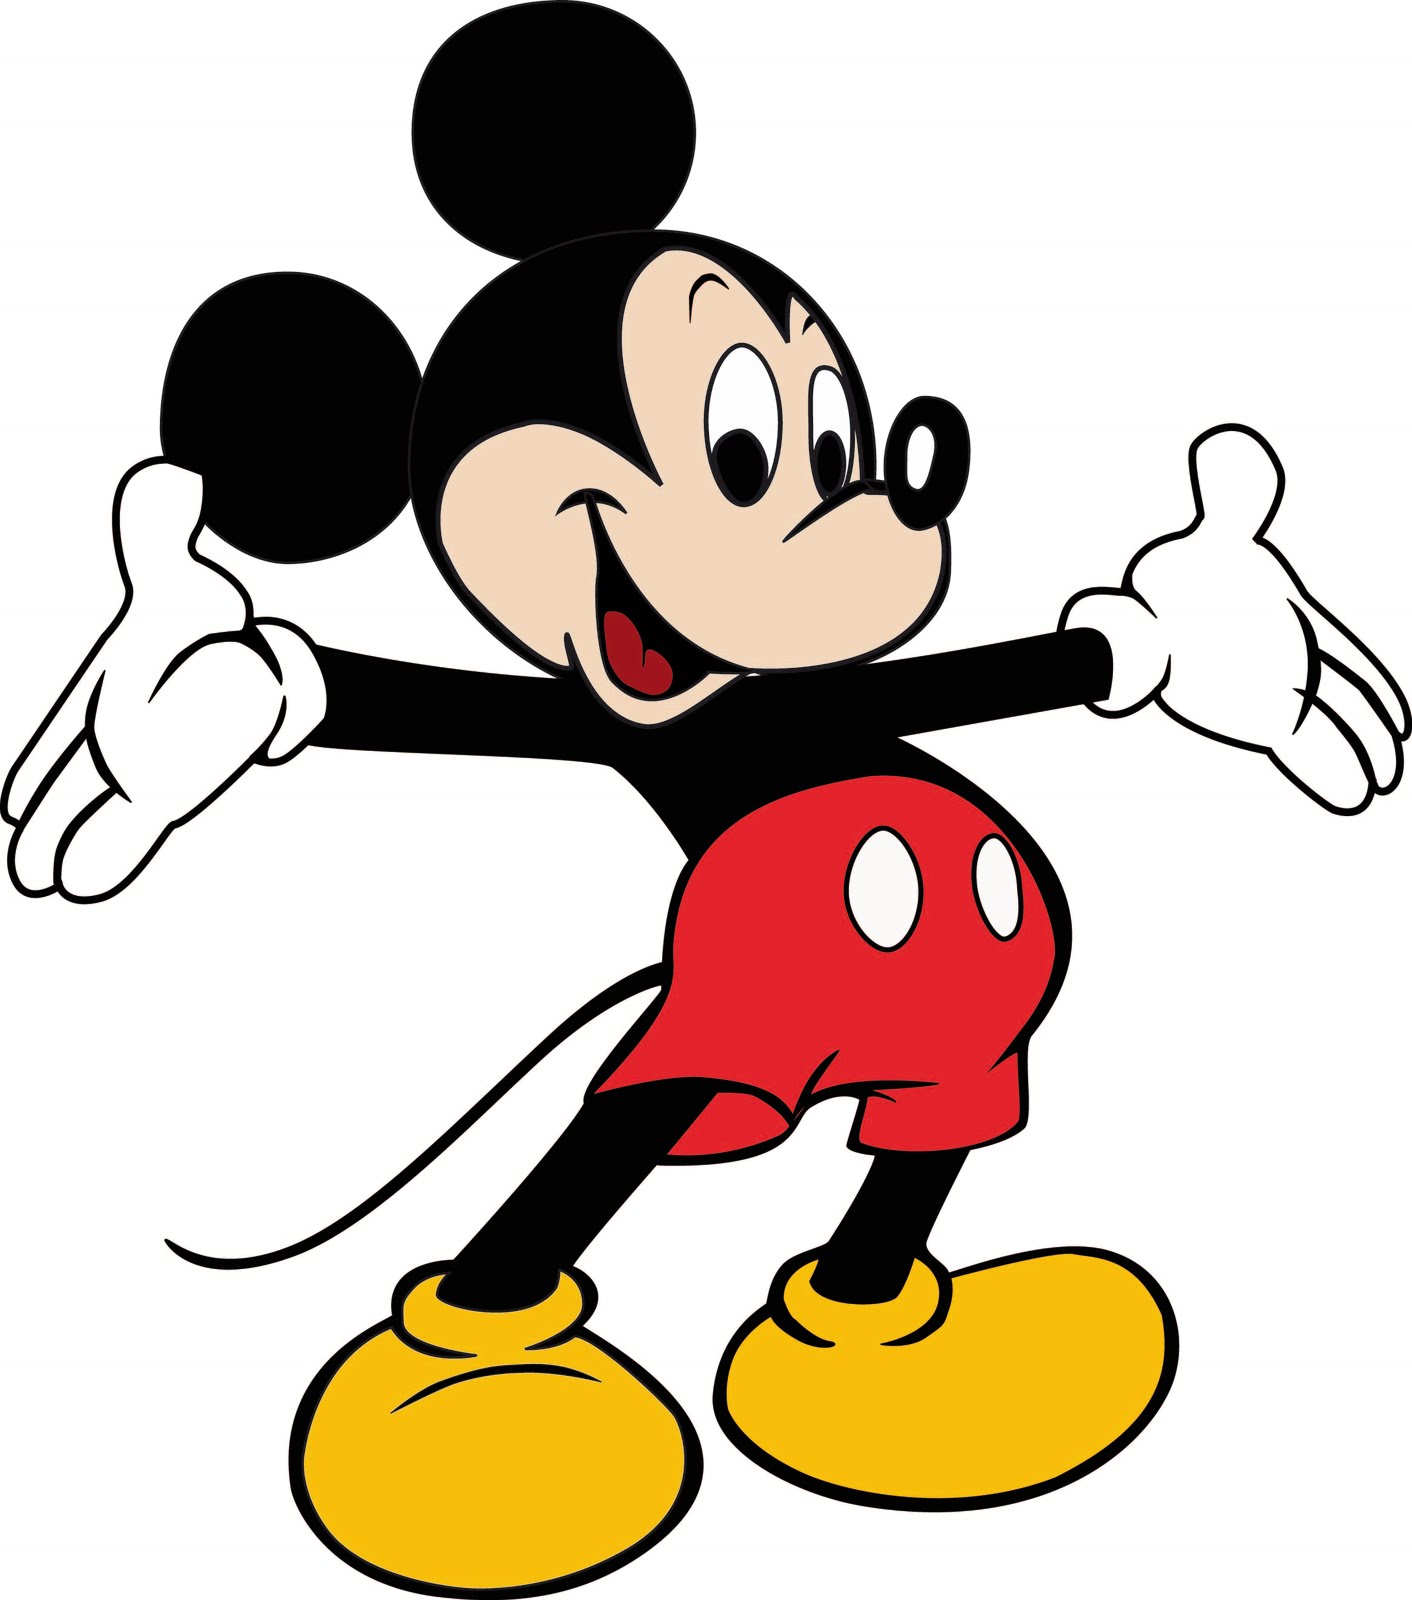 Mickey Mouse Cartoon Formspring Background - ClipArt Best ...